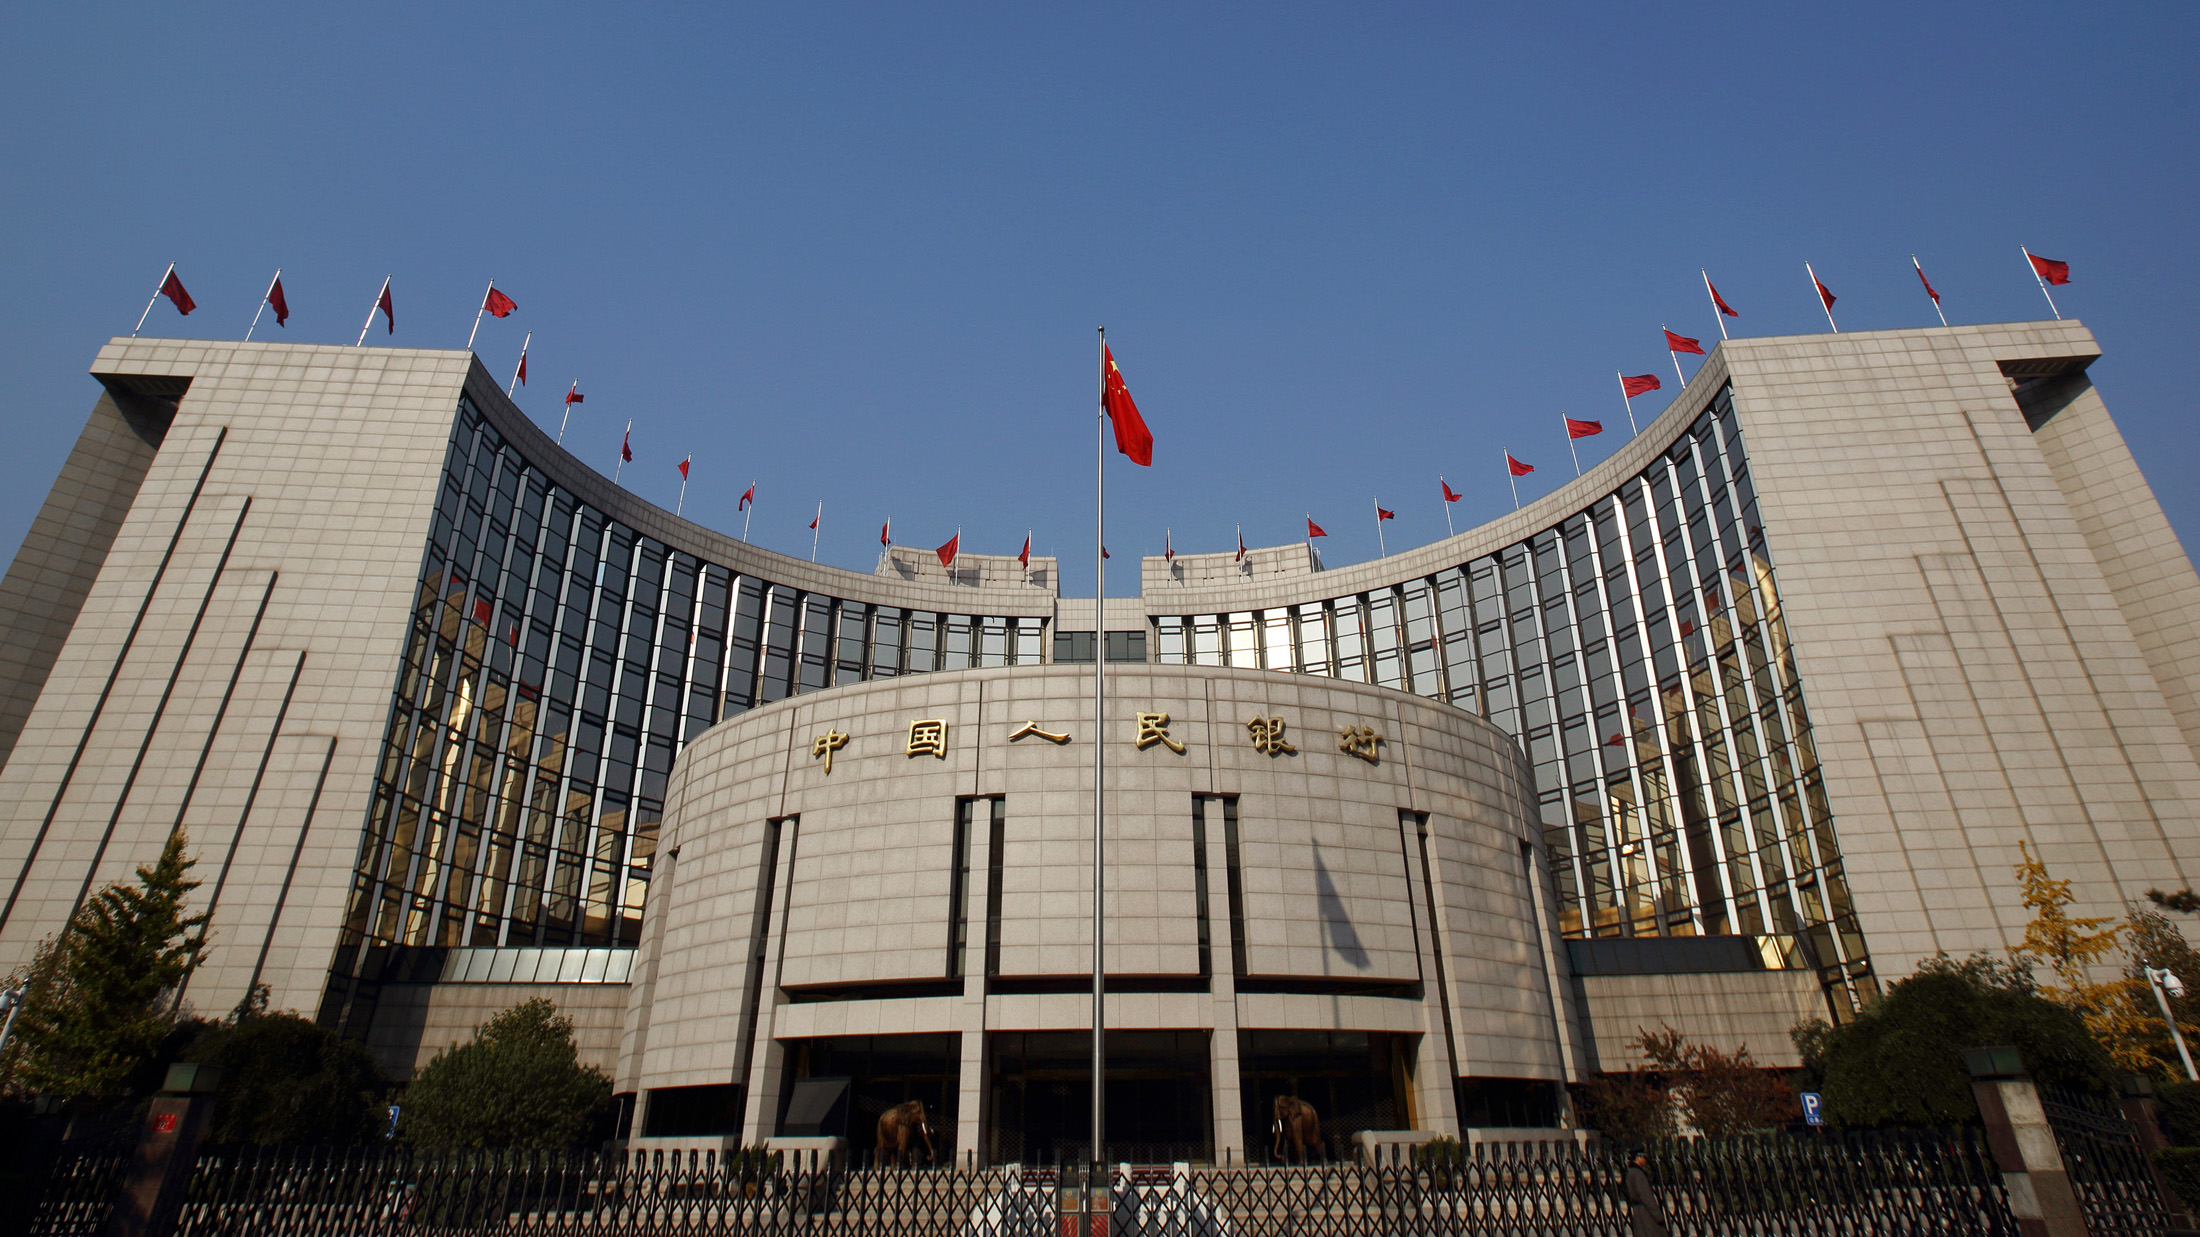 The People's Bank Of China (PBOC) headquarters on Saturday, Nov. 8, 2014.
